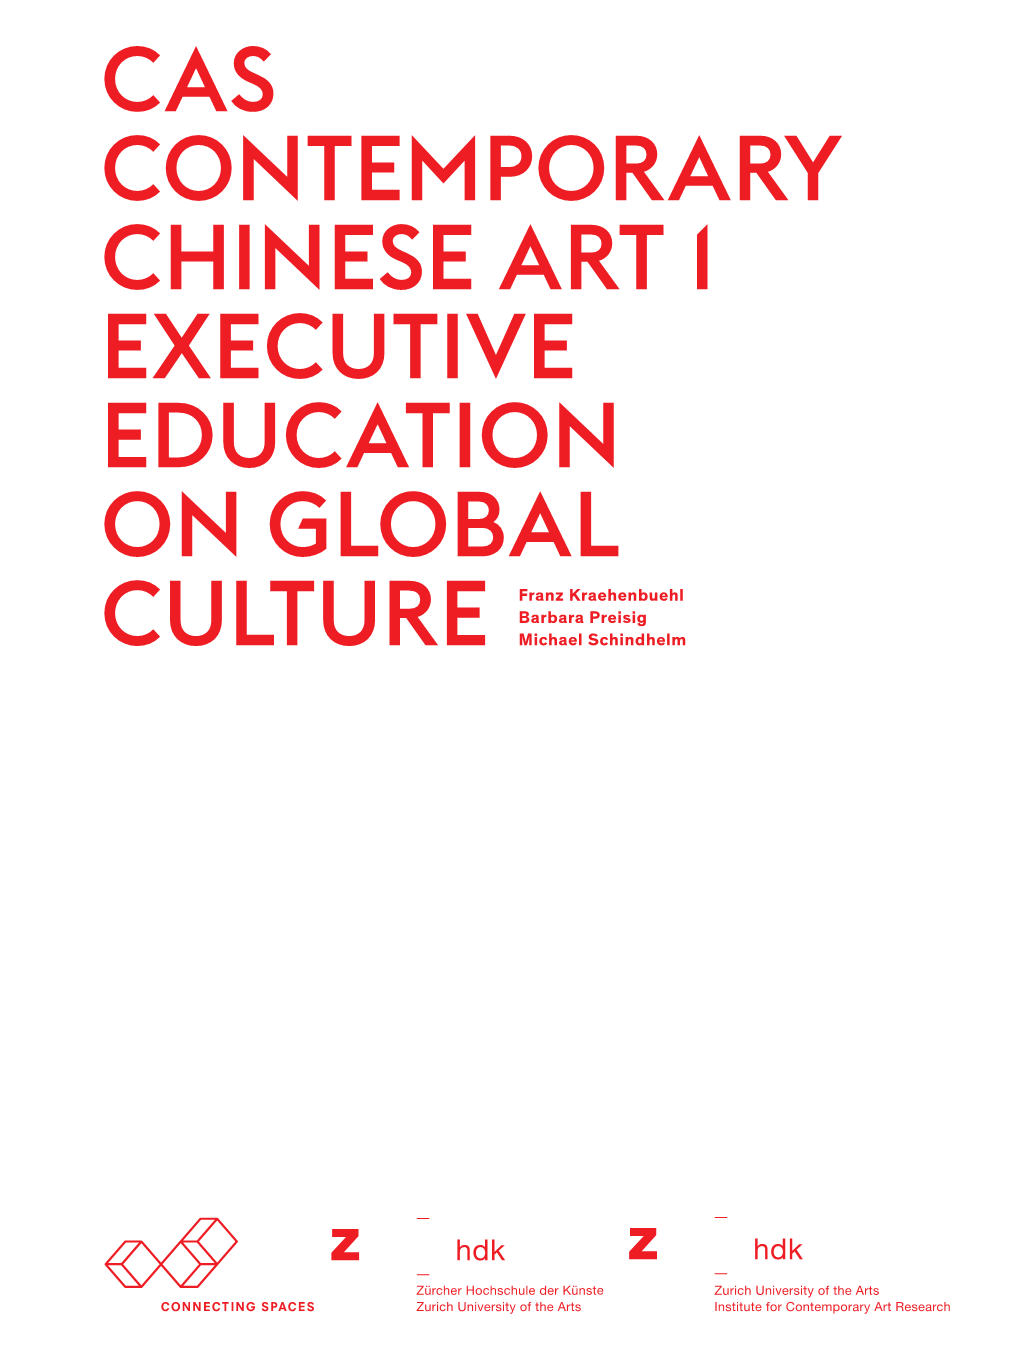 CAS Chinese Contemporary Art 1, March 2015 FOCUS: CHINESE CONTEMPORARY ART AWARD MR